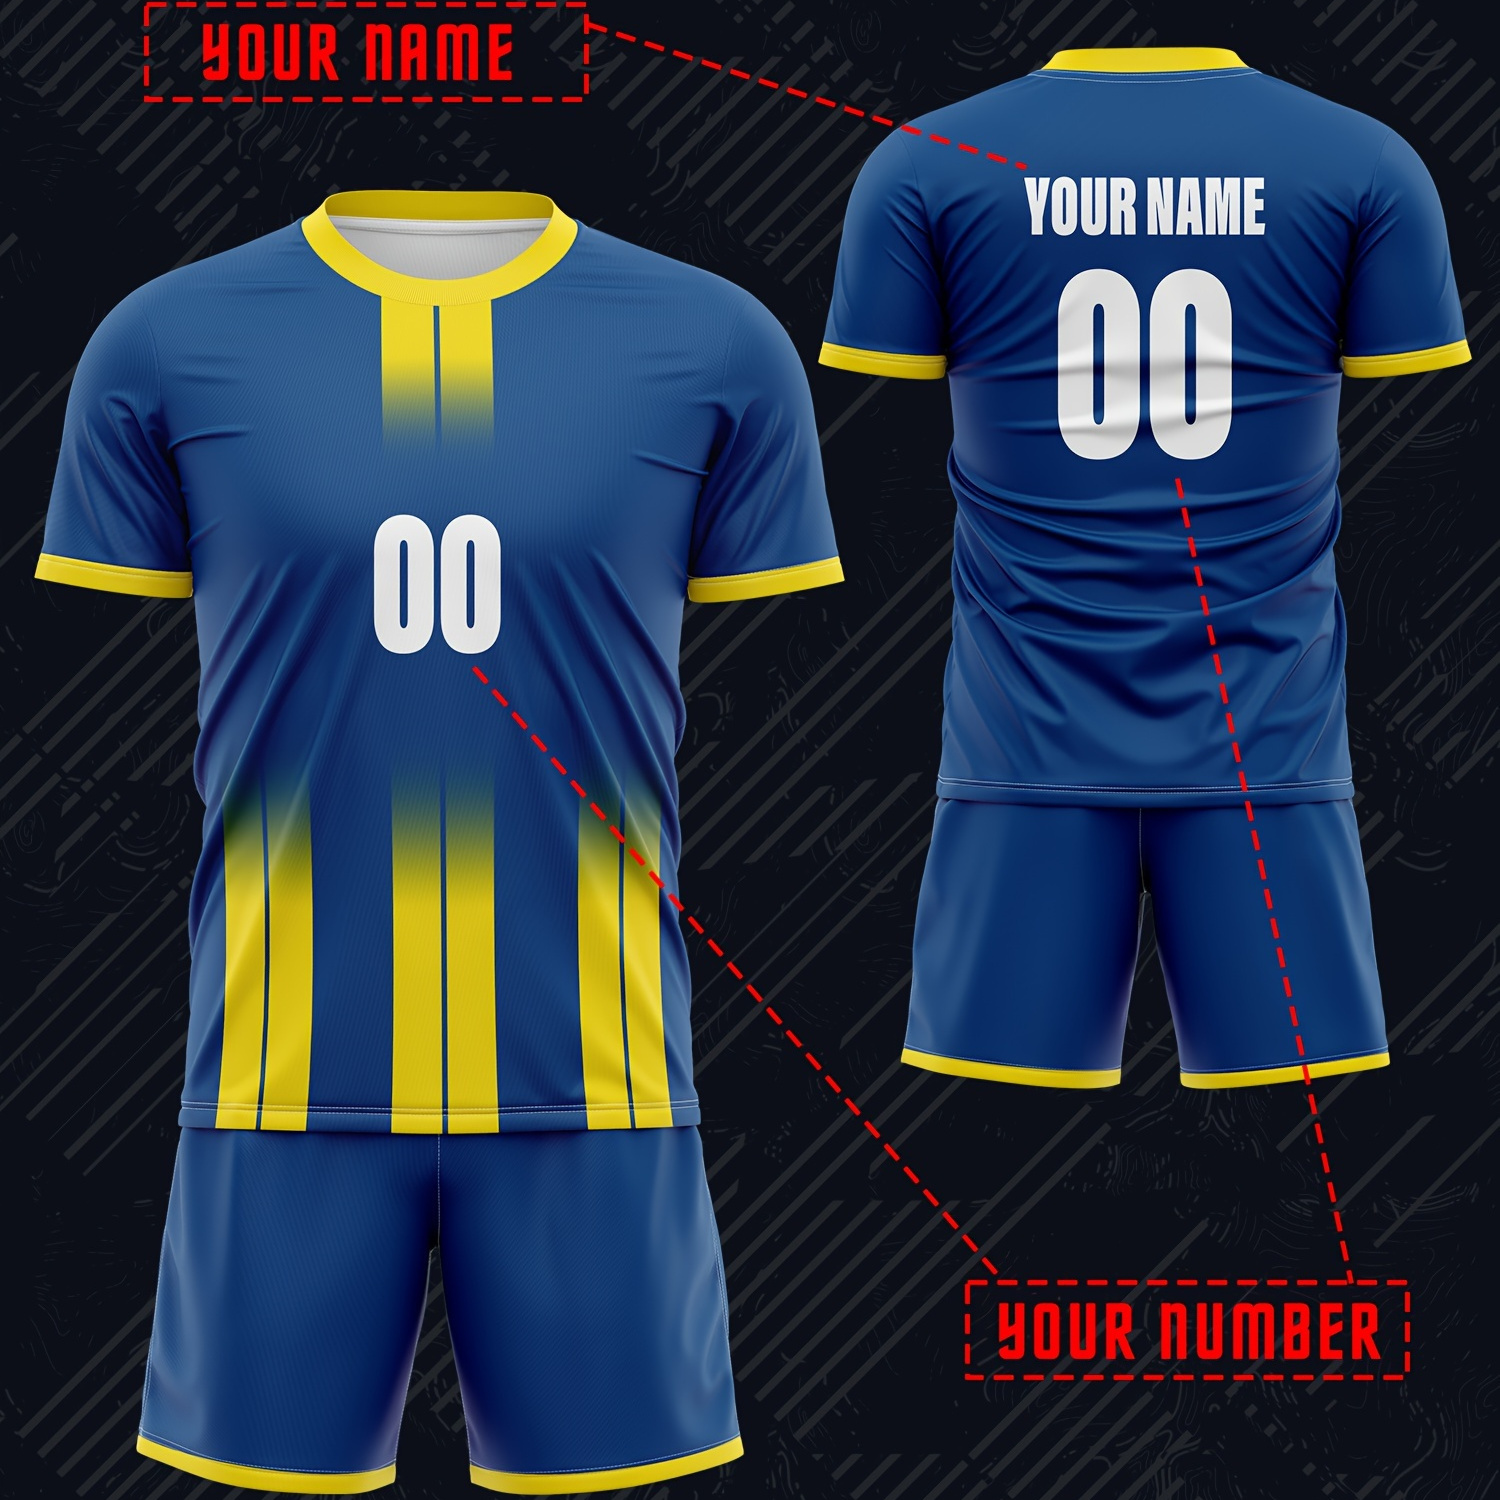 

2pcs Customized Name & Number Boys Football Jersey Short-sleeved Top & Shorts Blue & Yellow Co-ord Set, Stripes Sliced Print, Comfortable Fit, Perfect Sports Leisure Outdoor Clothing